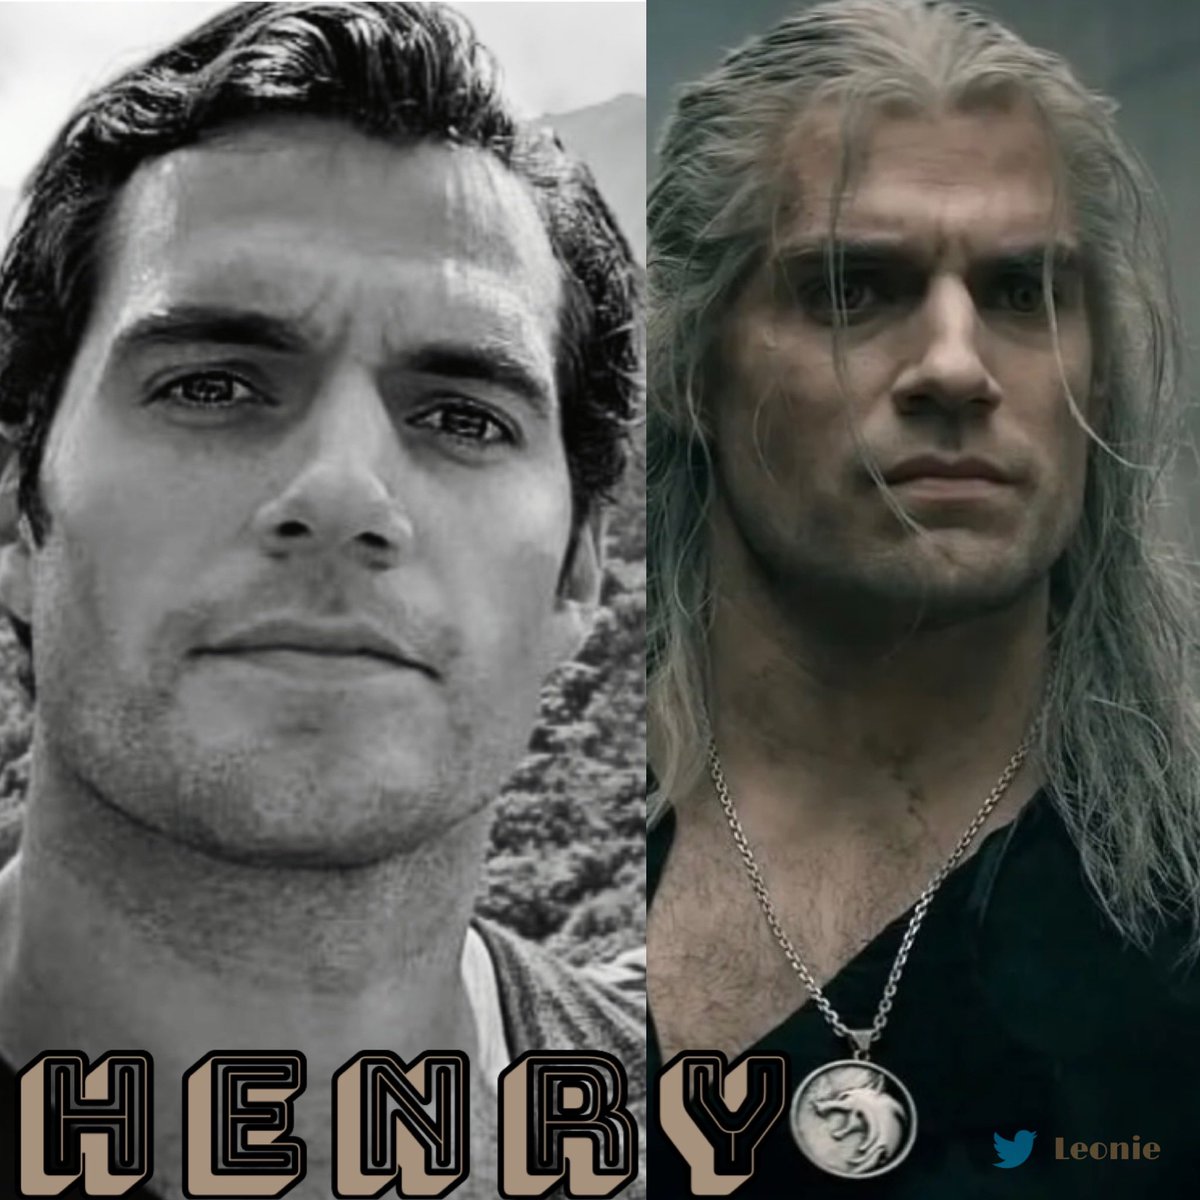 The temp° in the room just went up 🥵 and his personality will attract your heart ♥️ his name is #HenryCavill …looking forward to S3 #TheWitcher it is going to b wickedly awesome!😎 .. 👉 *Henry Cavill is definitely #JamesBond material #BarbaraBroccoli @007 🙌